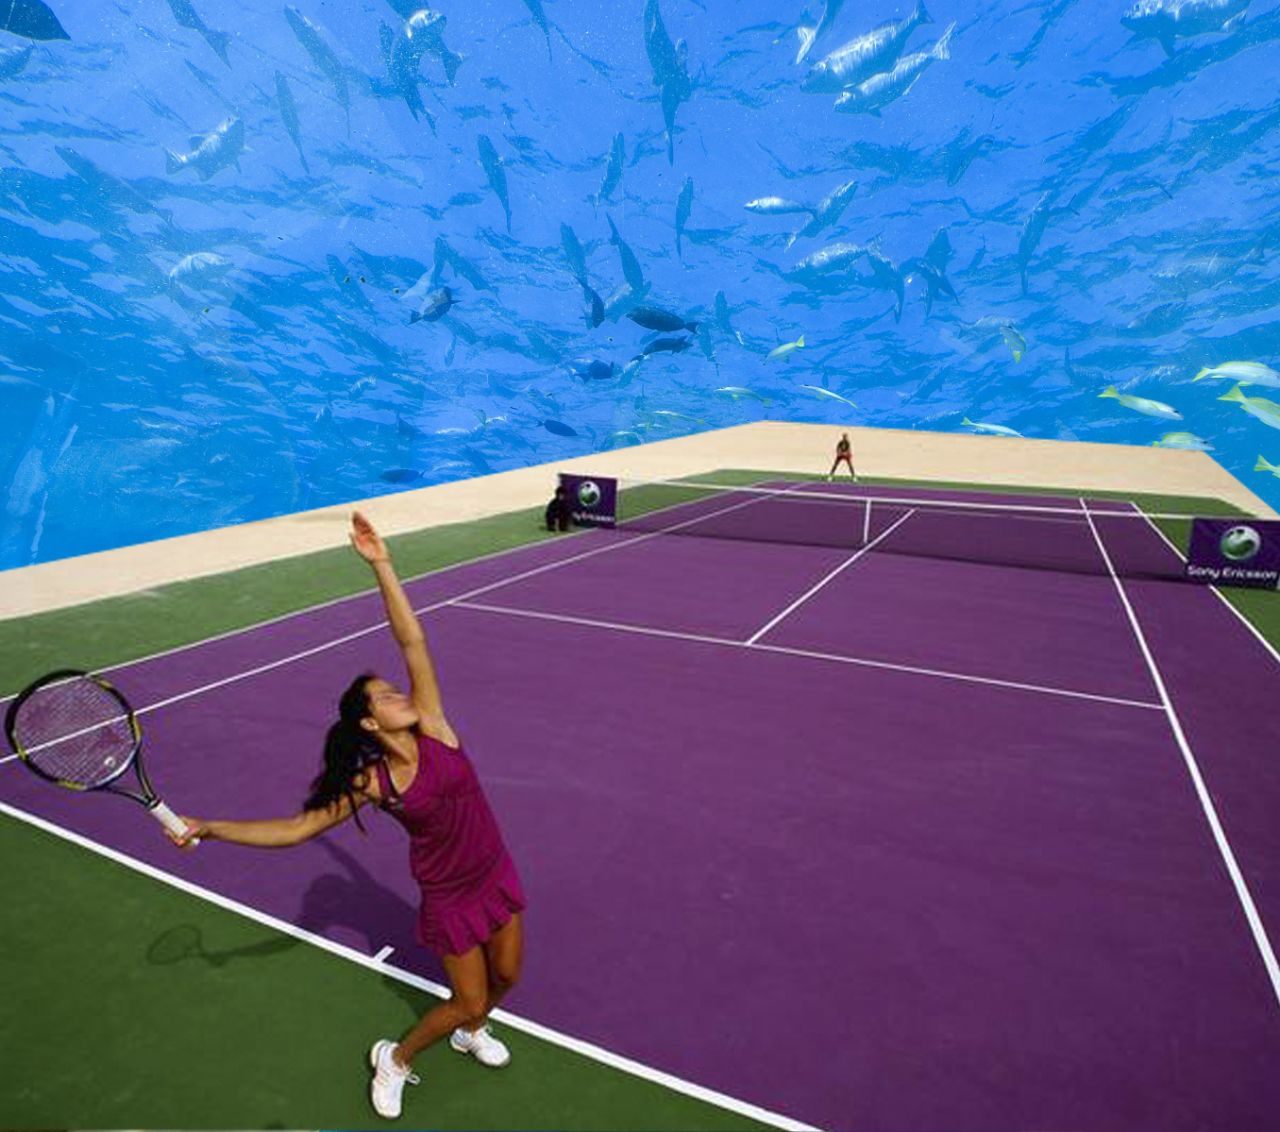 Serving up underwater tennis does not come cheap. Krzysztof, <a href="http://www.sportskeeda.com/tennis/underwater-tennis-stadium-could-be-a-reality-dubai" target="_blank" target="_blank">who is reportedly seeking investors to set up the project off the coast of Dubai</a>, estimates the court will cost between $1.7-2.5 billion to build.